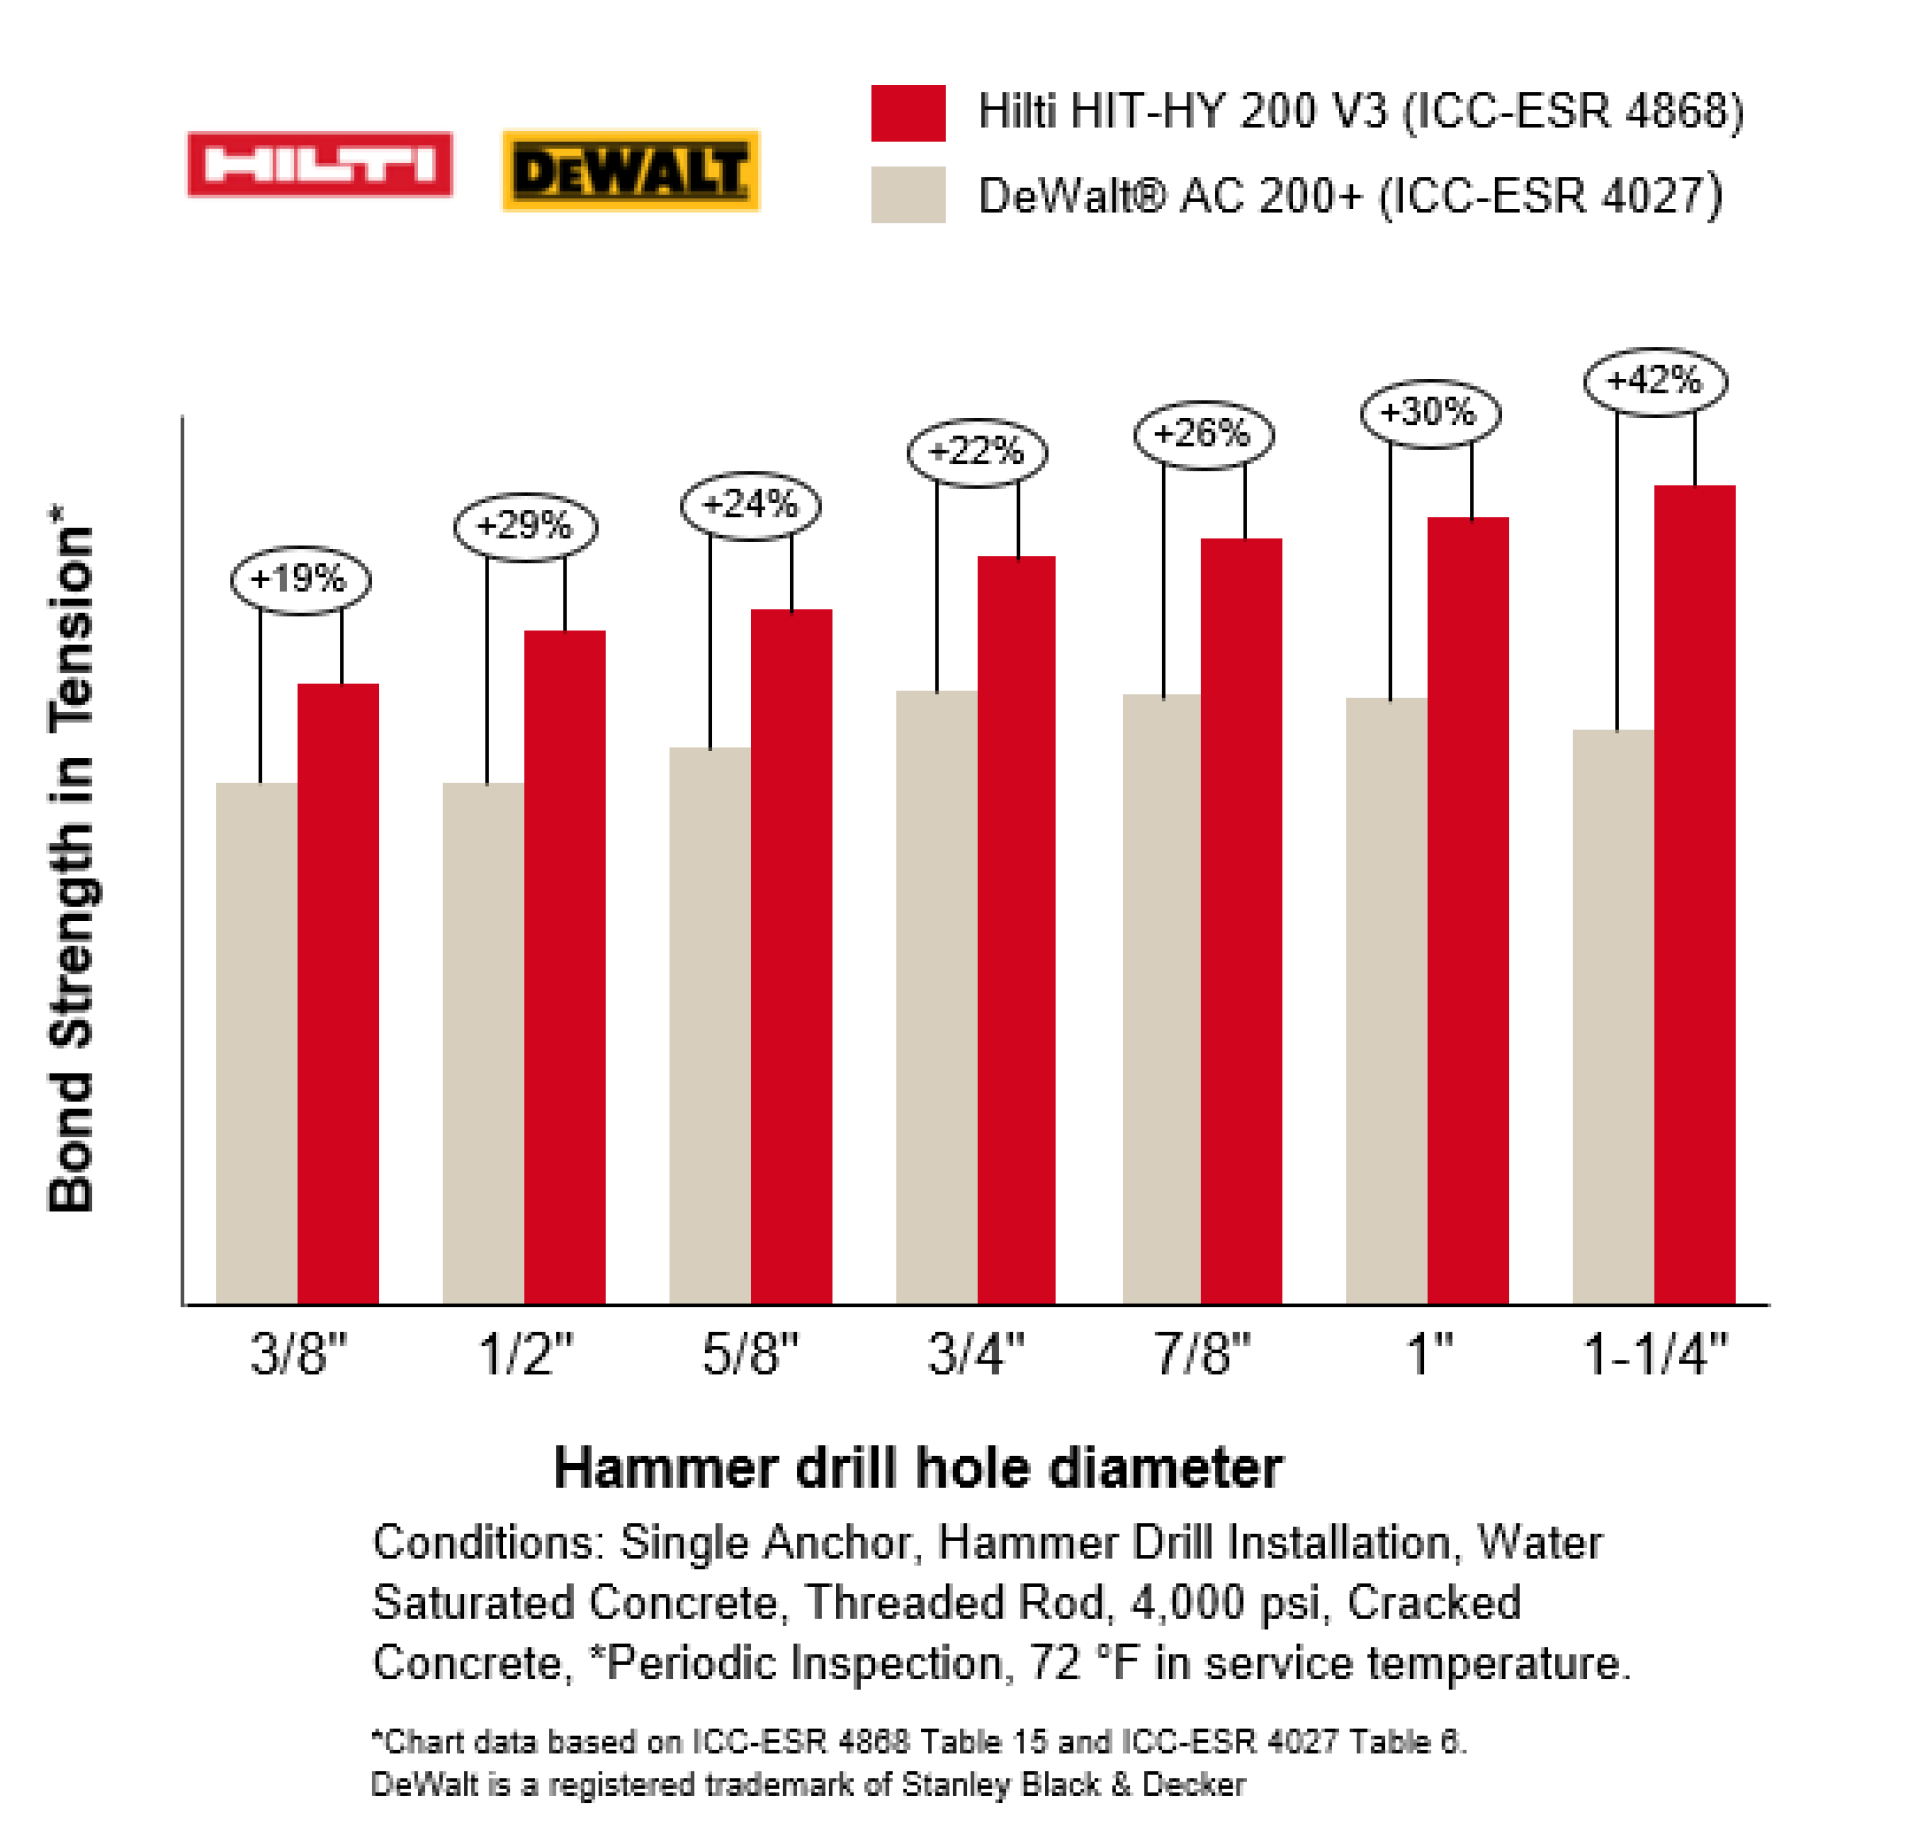 Bond Strength in Tension Competitive Performance: Hilti vs DeWalt Bond Strength in Tension load x threaded rod diameter comparison chart for Water Saturated conditions; Hilti HIT-HY 200 V3; DeWalt AC200+ ; 3/8” +19%; 1/2” +29%; 5/8” +24%; 3/4” +22%; 7/8” +26%; 1” +30%; 1-1/4” +42%; conditions single anchor, hammer drill installation, water saturated concrete, threaded rod, 4000psi, cracked concrete, Periodic Inspection, 72 °F in service temperature. Chart data based on ICC-ESR 4868 Table 15 and ICC-ESR 4027 Table 6. DeWalt is a registered trademark of Stanley Black & Decker